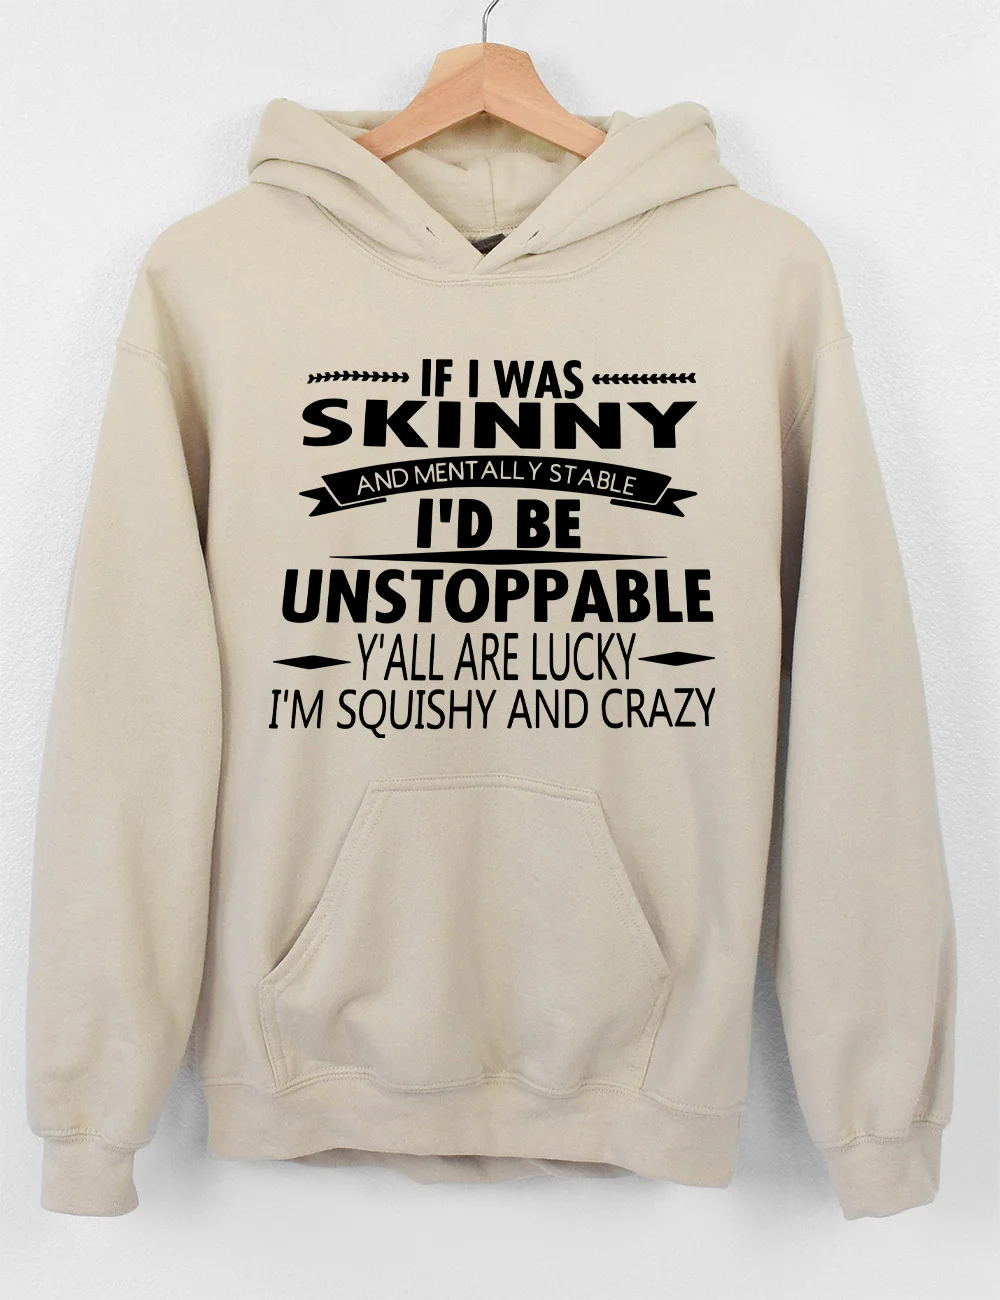 If I Was Skinny And Mentally Stable Hoodie